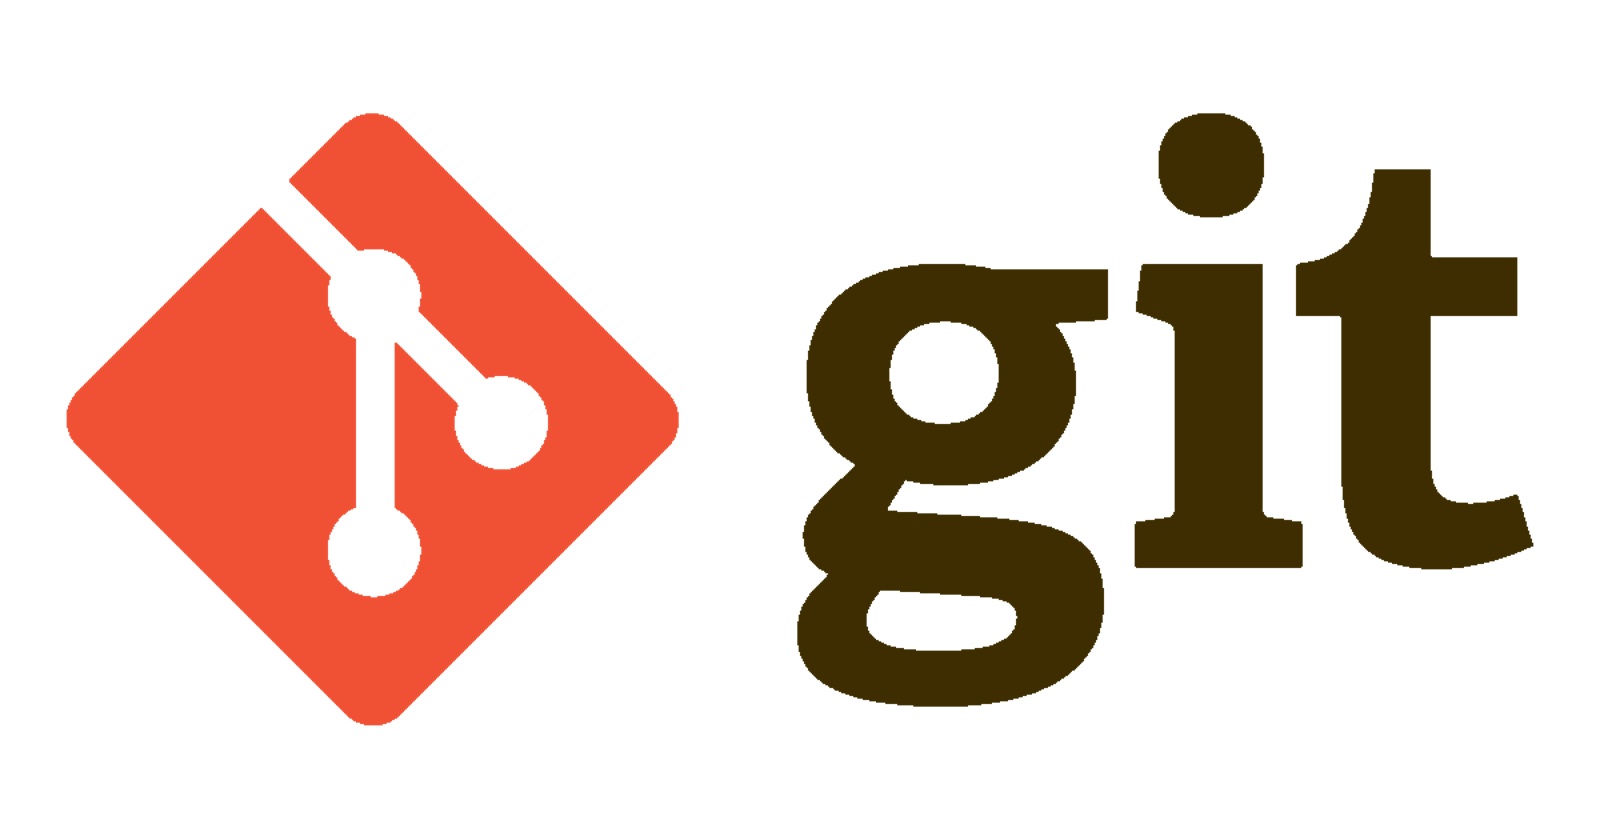 Starting With Git (Or rebuilding your dev environment from scratch)